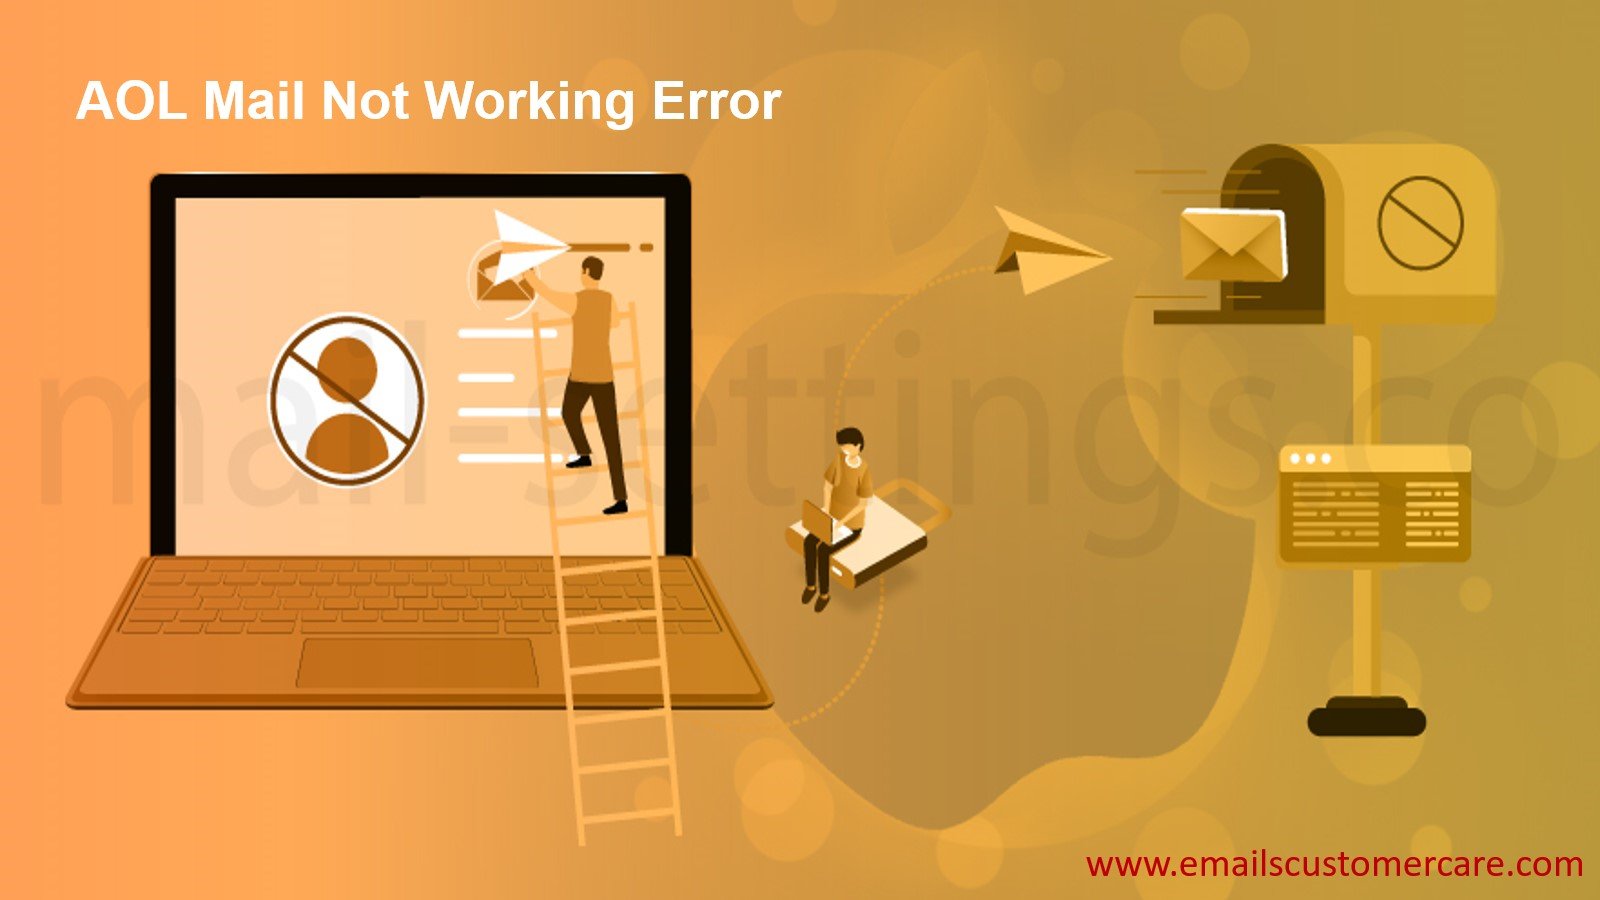 EASY STEP TO FIX AOL MAIL NOT WORKING ERROR